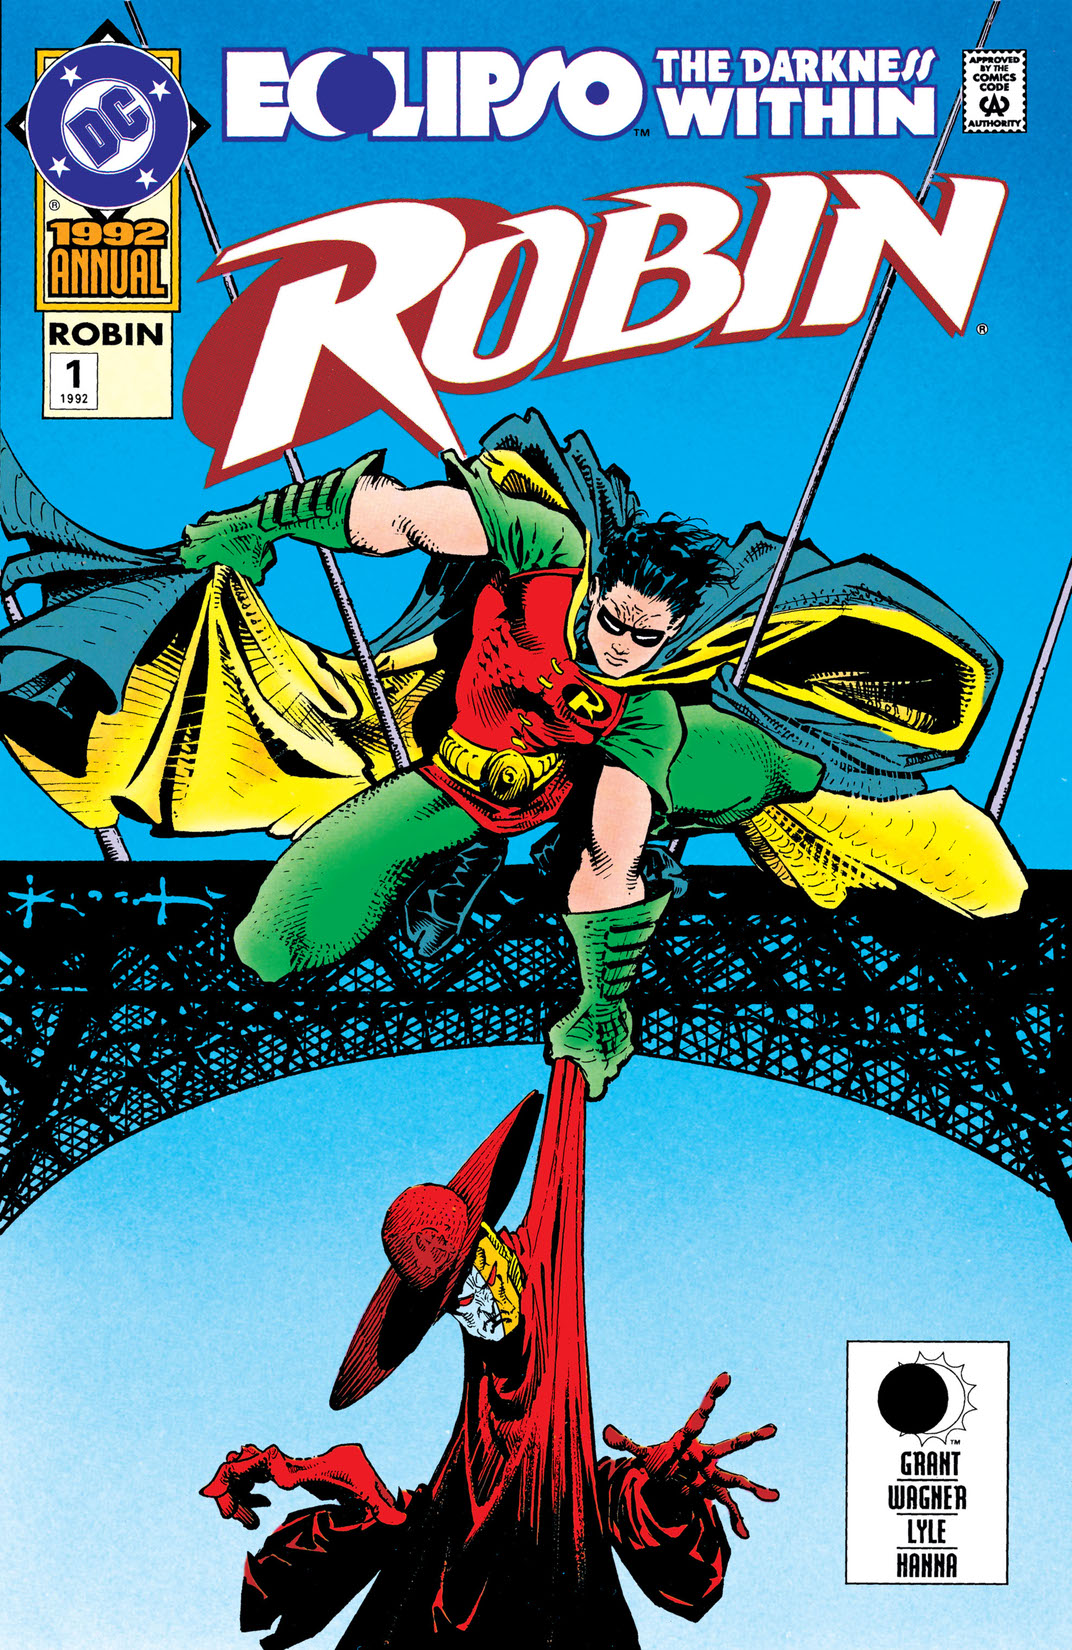 Robin Annual (1992-) #1 preview images